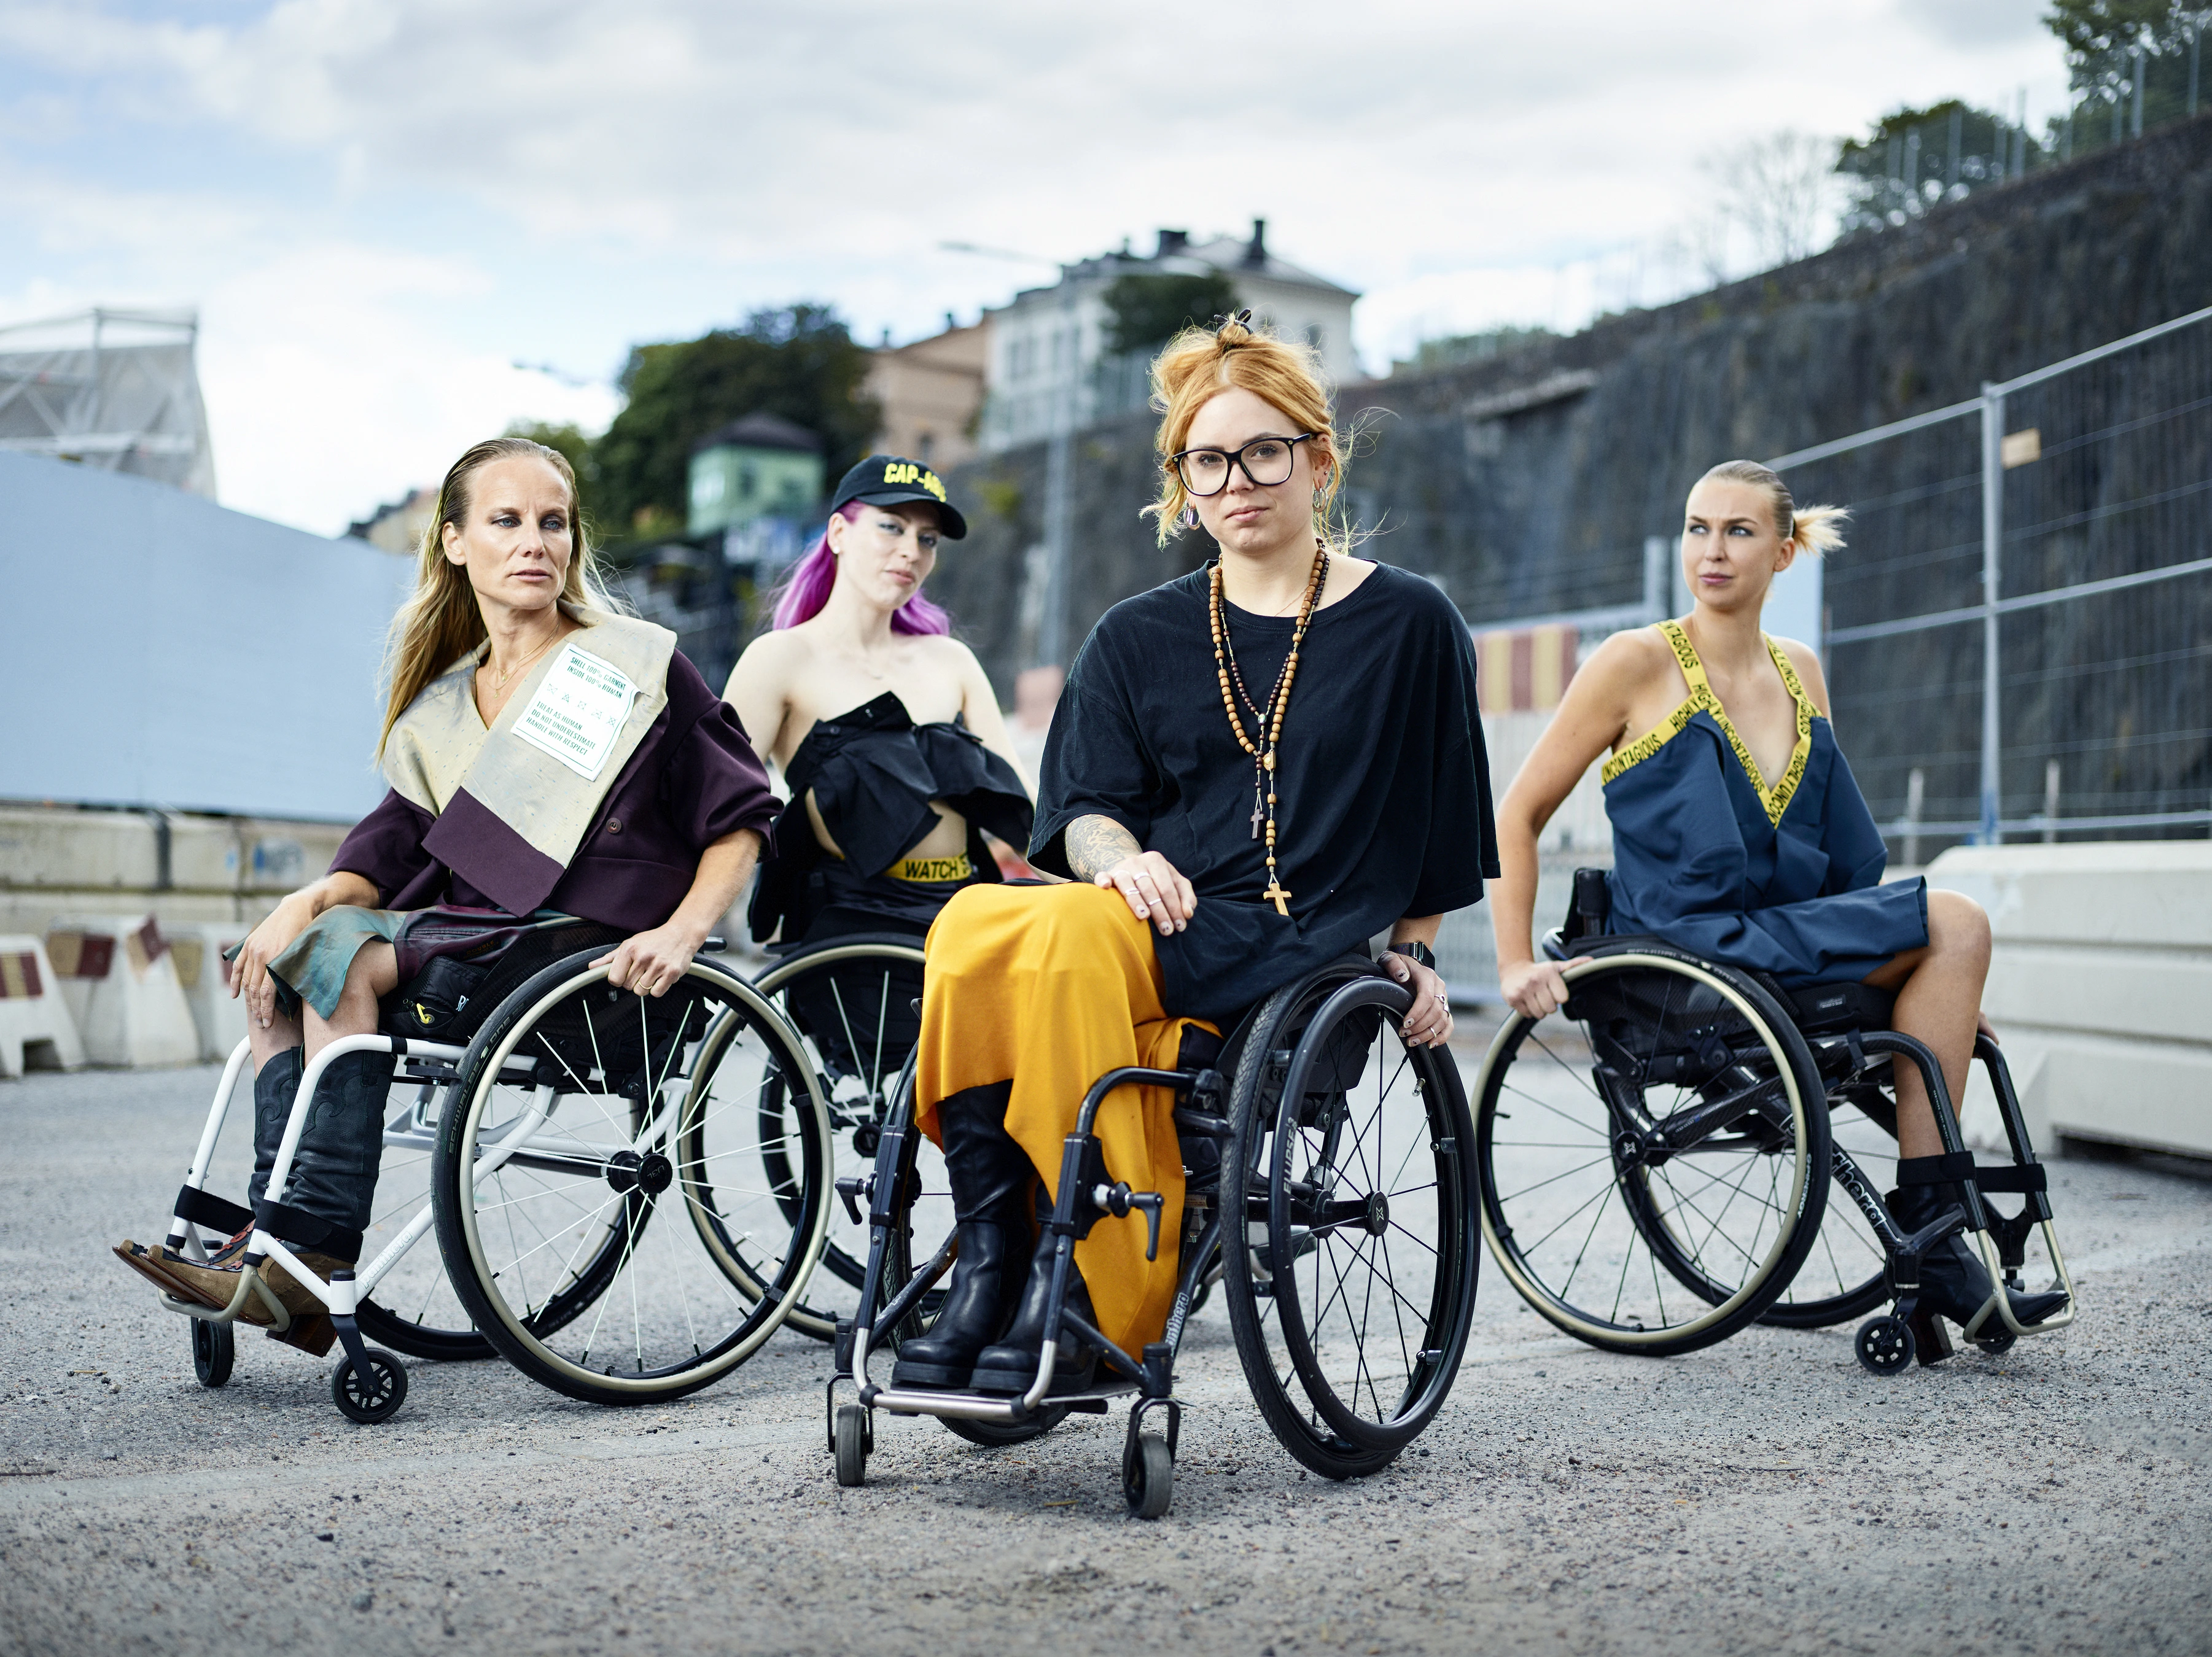 Stockholm Fashion Week: “Who Chairs? – Don’t worry I’ll bring a ramp” photo of four models in wheelchairs